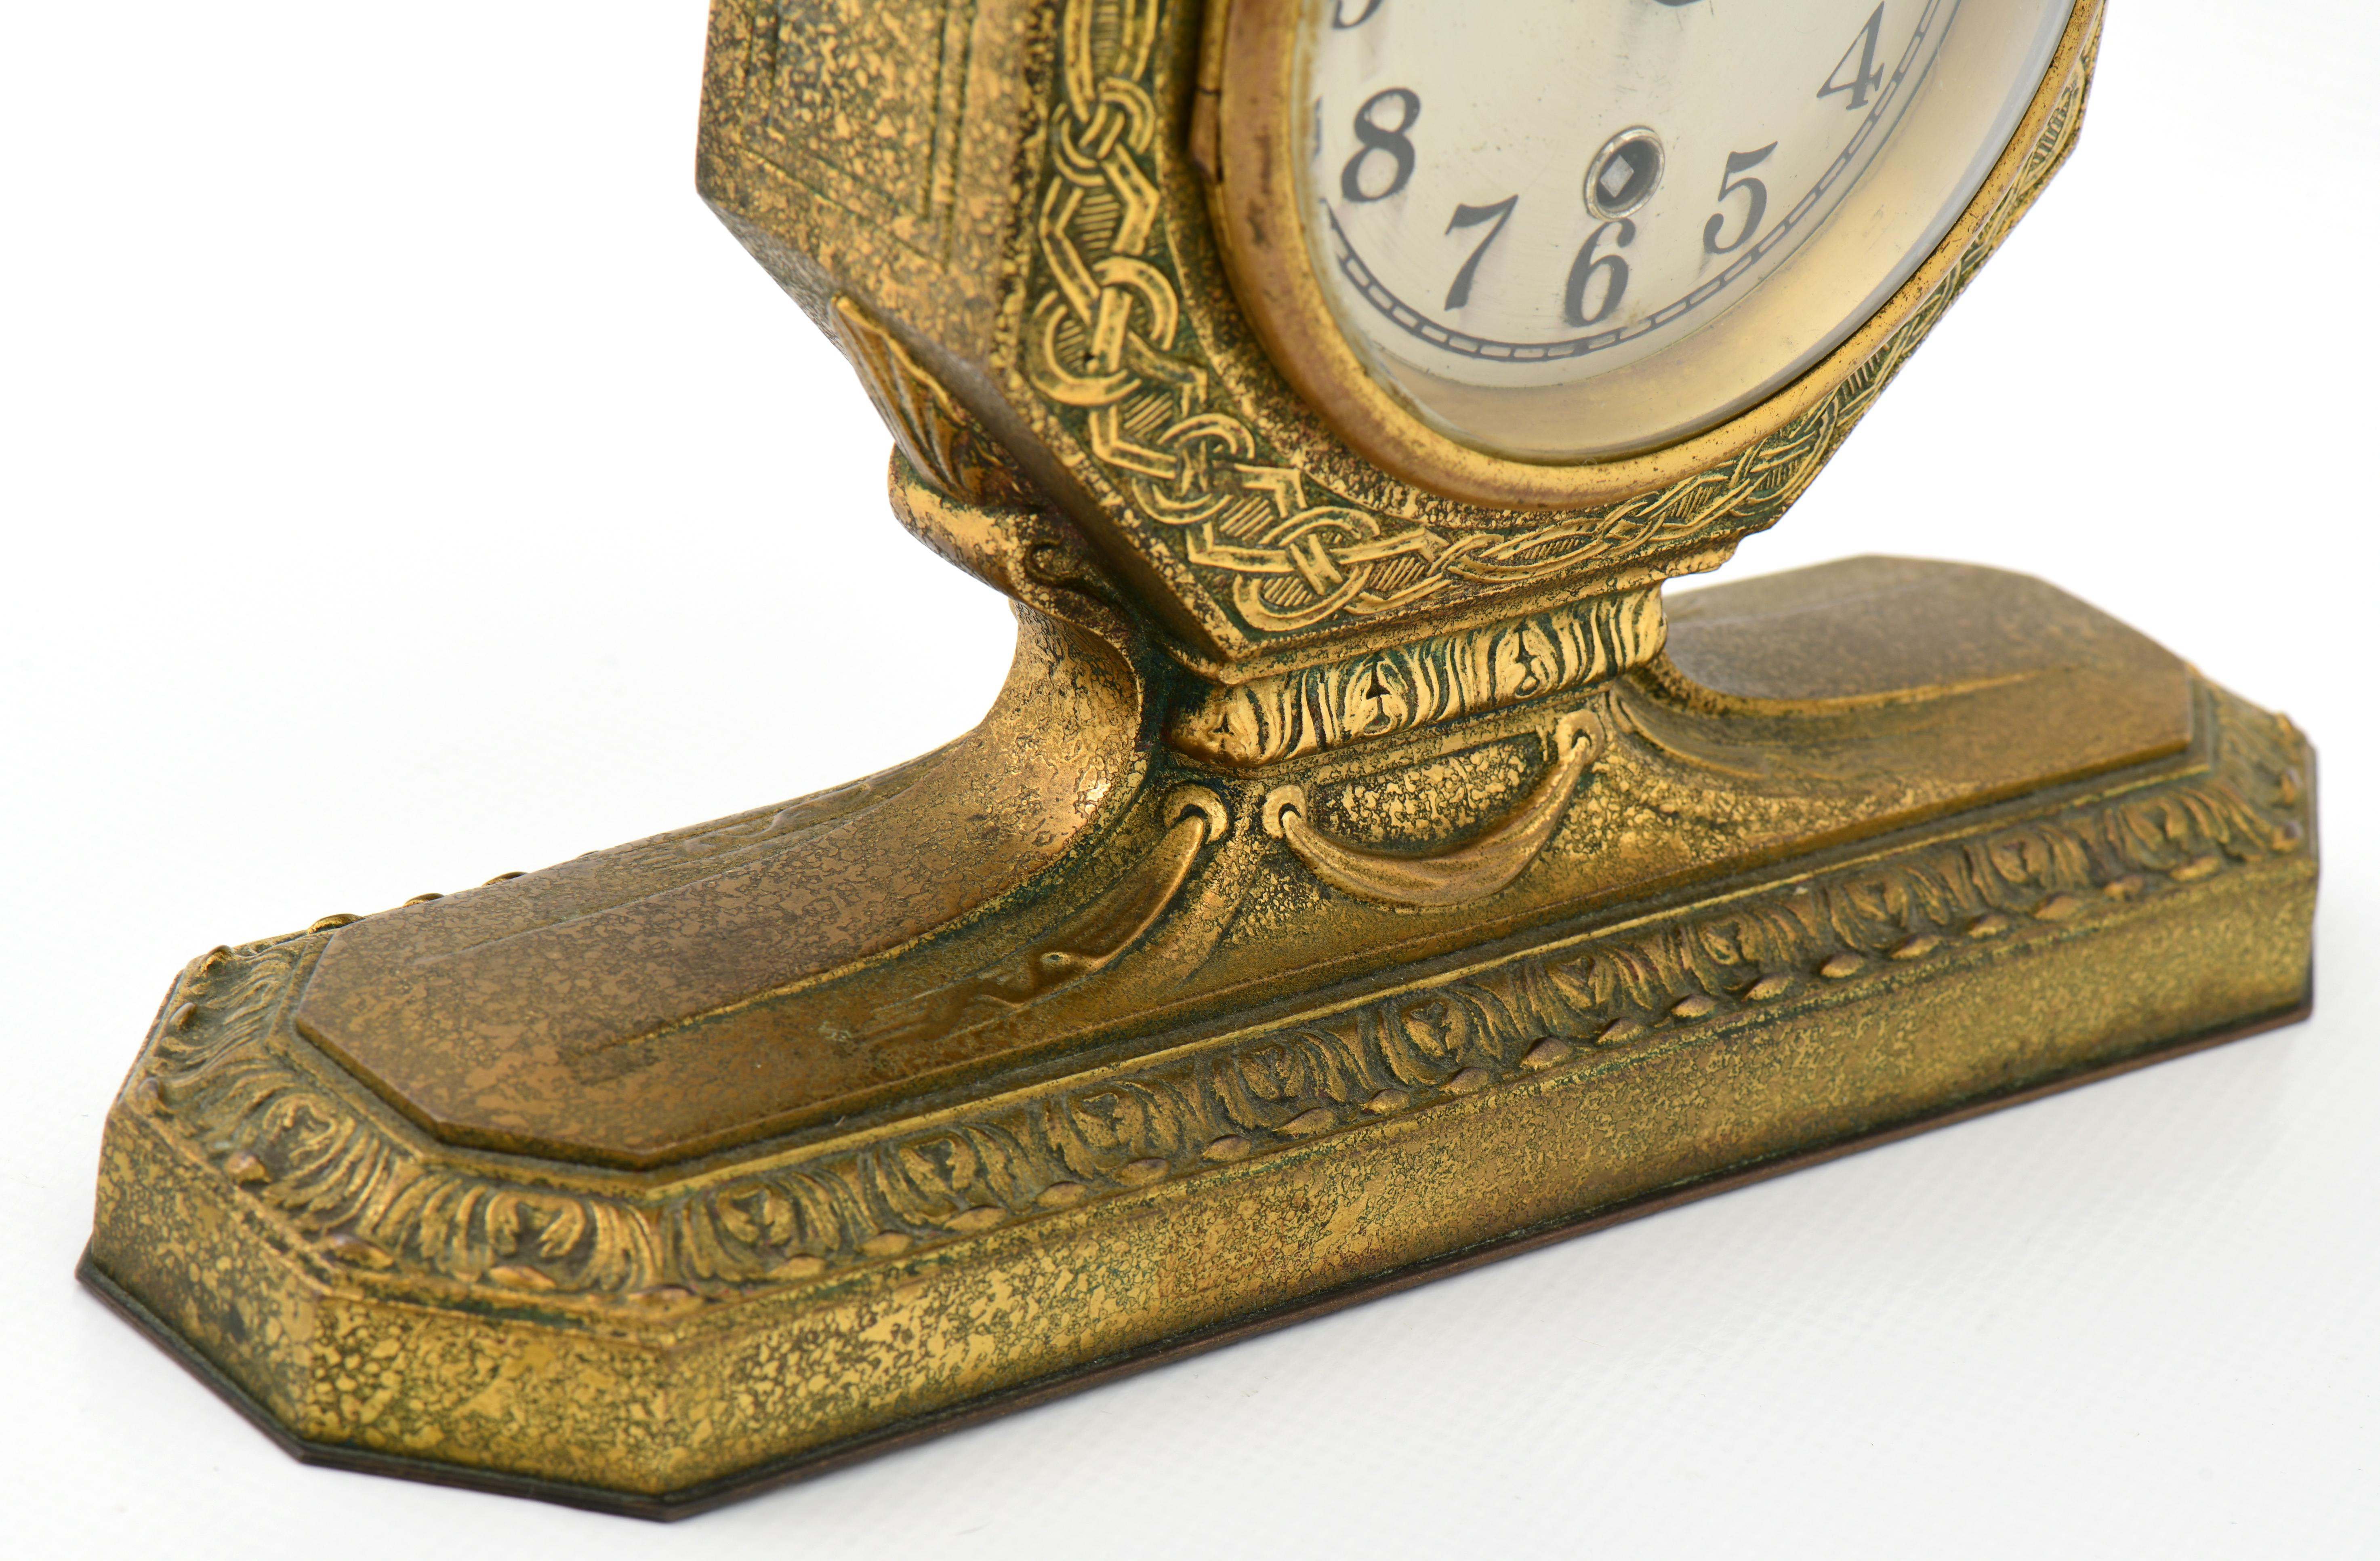 Tiffany Studios and Tiffany & Co. Mantel Clock In Good Condition For Sale In Lenox, MA